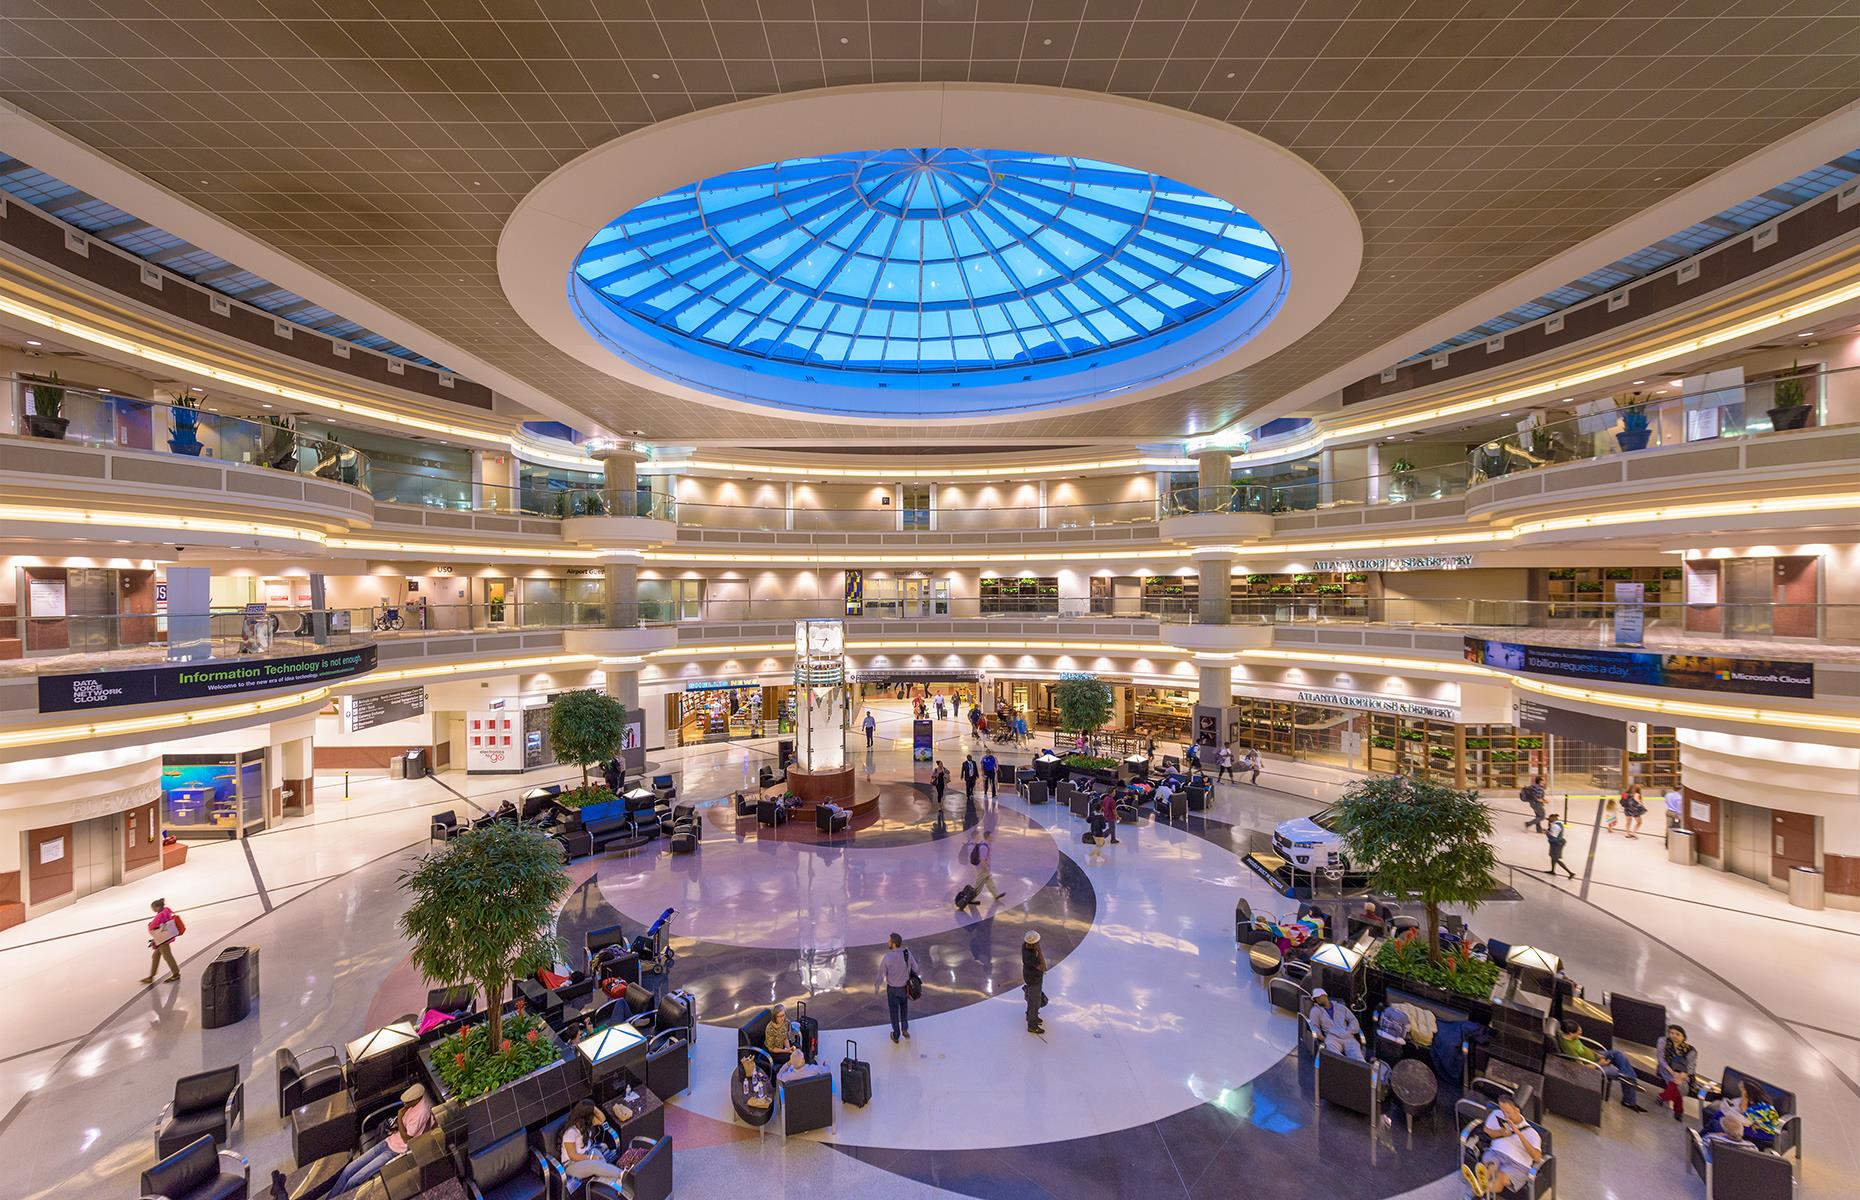 <p>Officially the <a href="https://www.foxnews.com/travel/atlanta-loses-busiest-airport-ranking-covid">second busiest airport in the world in 2020</a>, Hartsfield-Jackson Atlanta moved a whopping 110 million passengers through its seven concourses in 2019, although that figure decreased by 61.2% last year due to the pandemic. Despite this, its efficiency means it scores higher (787) than average for mega airports (780). It's a major hub for international flights connecting to regional destinations across the US.</p>